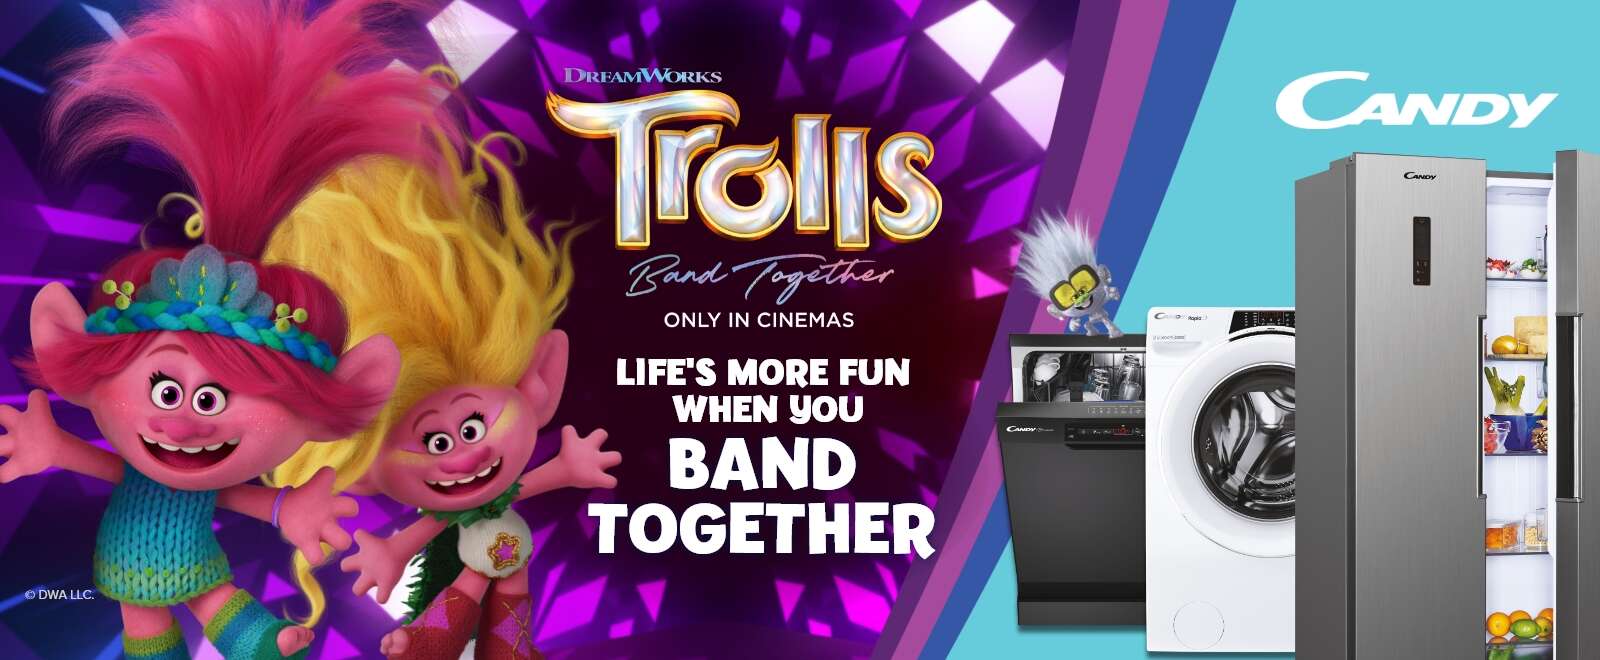 DreamWorks’ Trolls Band Together – Only in cinemas